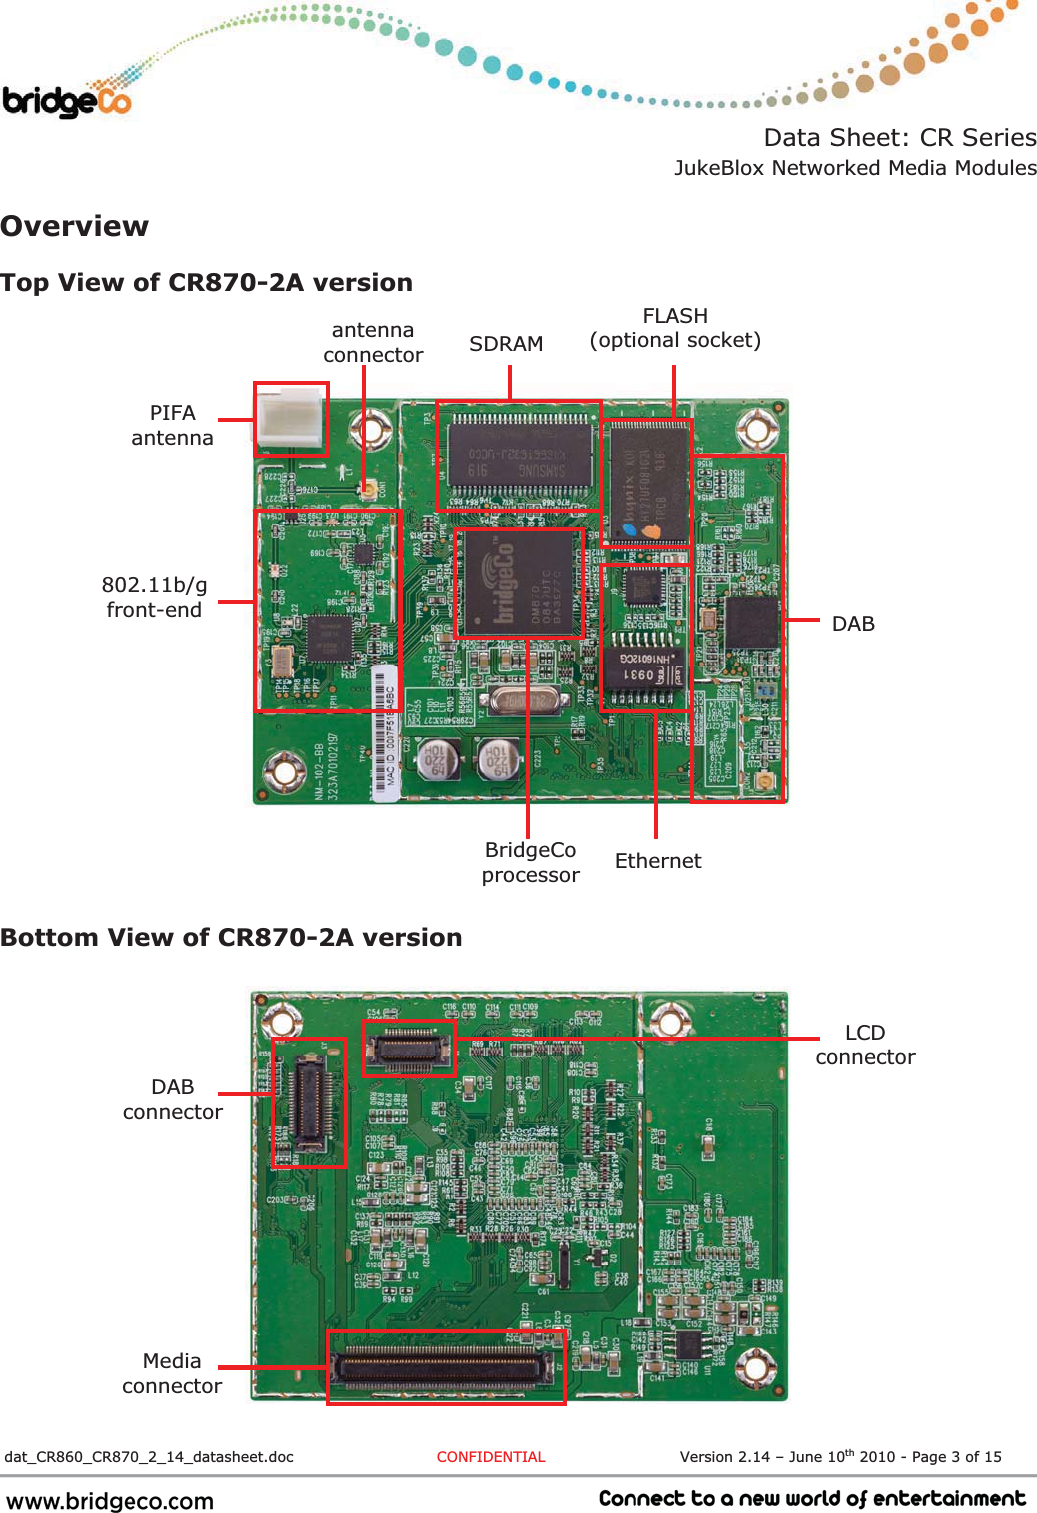 Data Sheet: CR Series JukeBlox Networked Media Modules  dat_CR860_CR870_2_14_datasheet.doc  CONFIDENTIAL                           Version 2.14 – June 10th 2010 - Page 3 of 15                             OverviewTop View of CR870-2A version Bottom View of CR870-2A version PIFAantenna802.11b/gfront-end BridgeCoprocessorEthernetDABFLASH(optional socket) SDRAMantennaconnectorMedia connectorDABconnectorLCDconnector